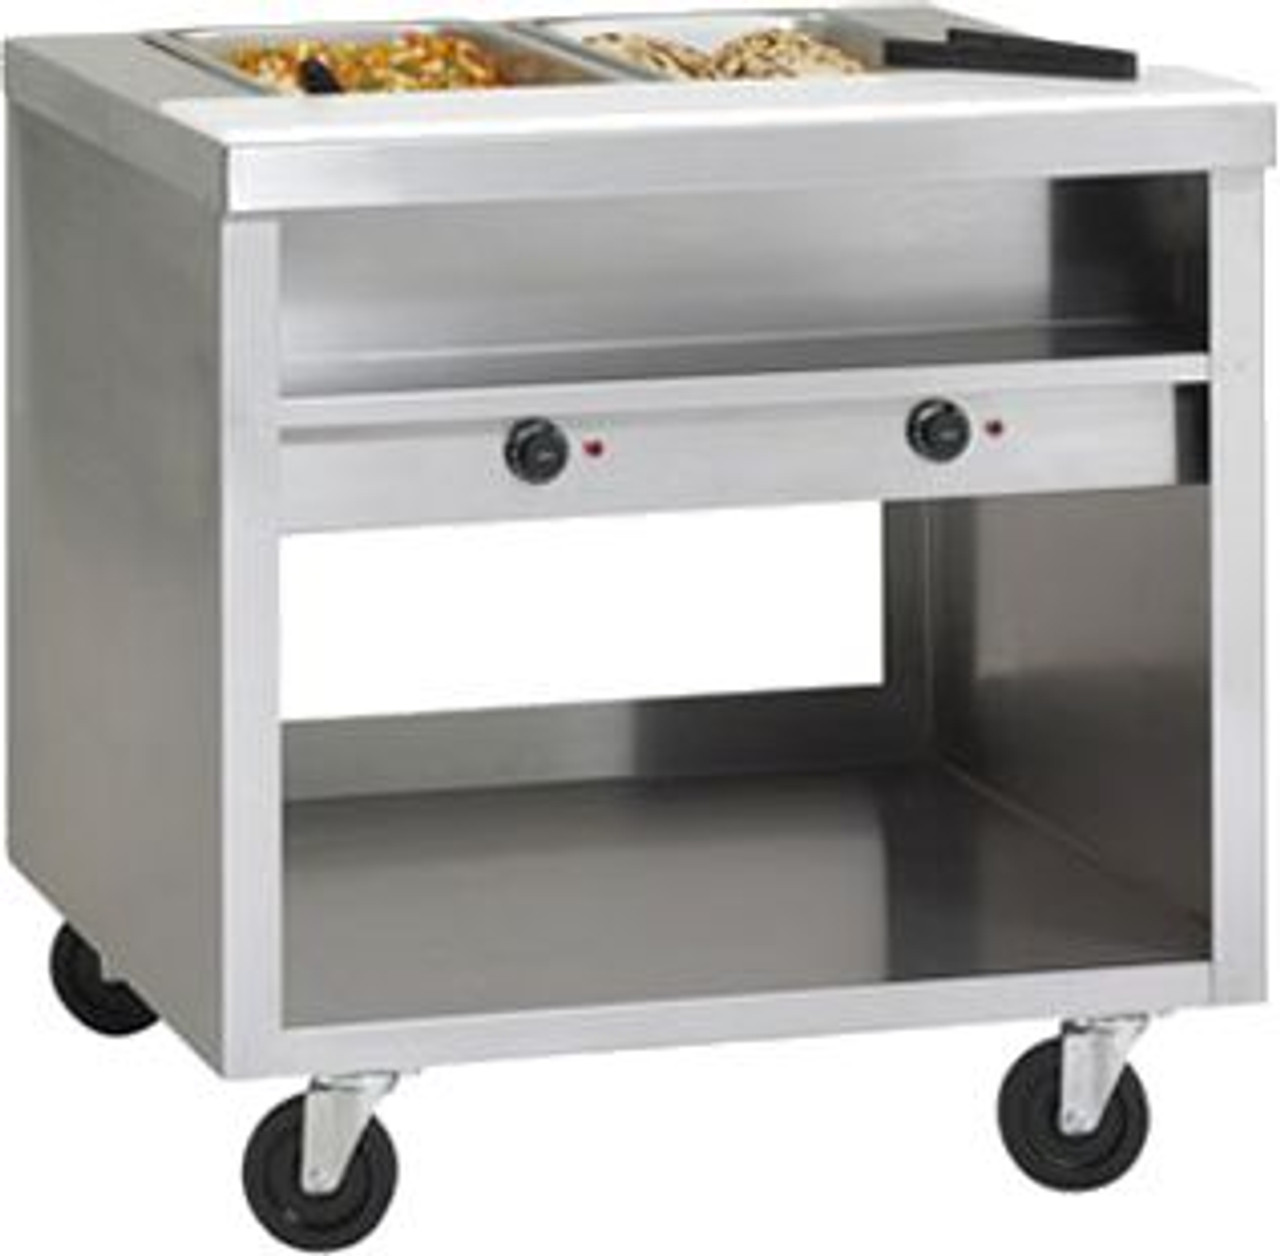 Delfield EHEI74C 74" Electric 5 Well Steam Table - Casters